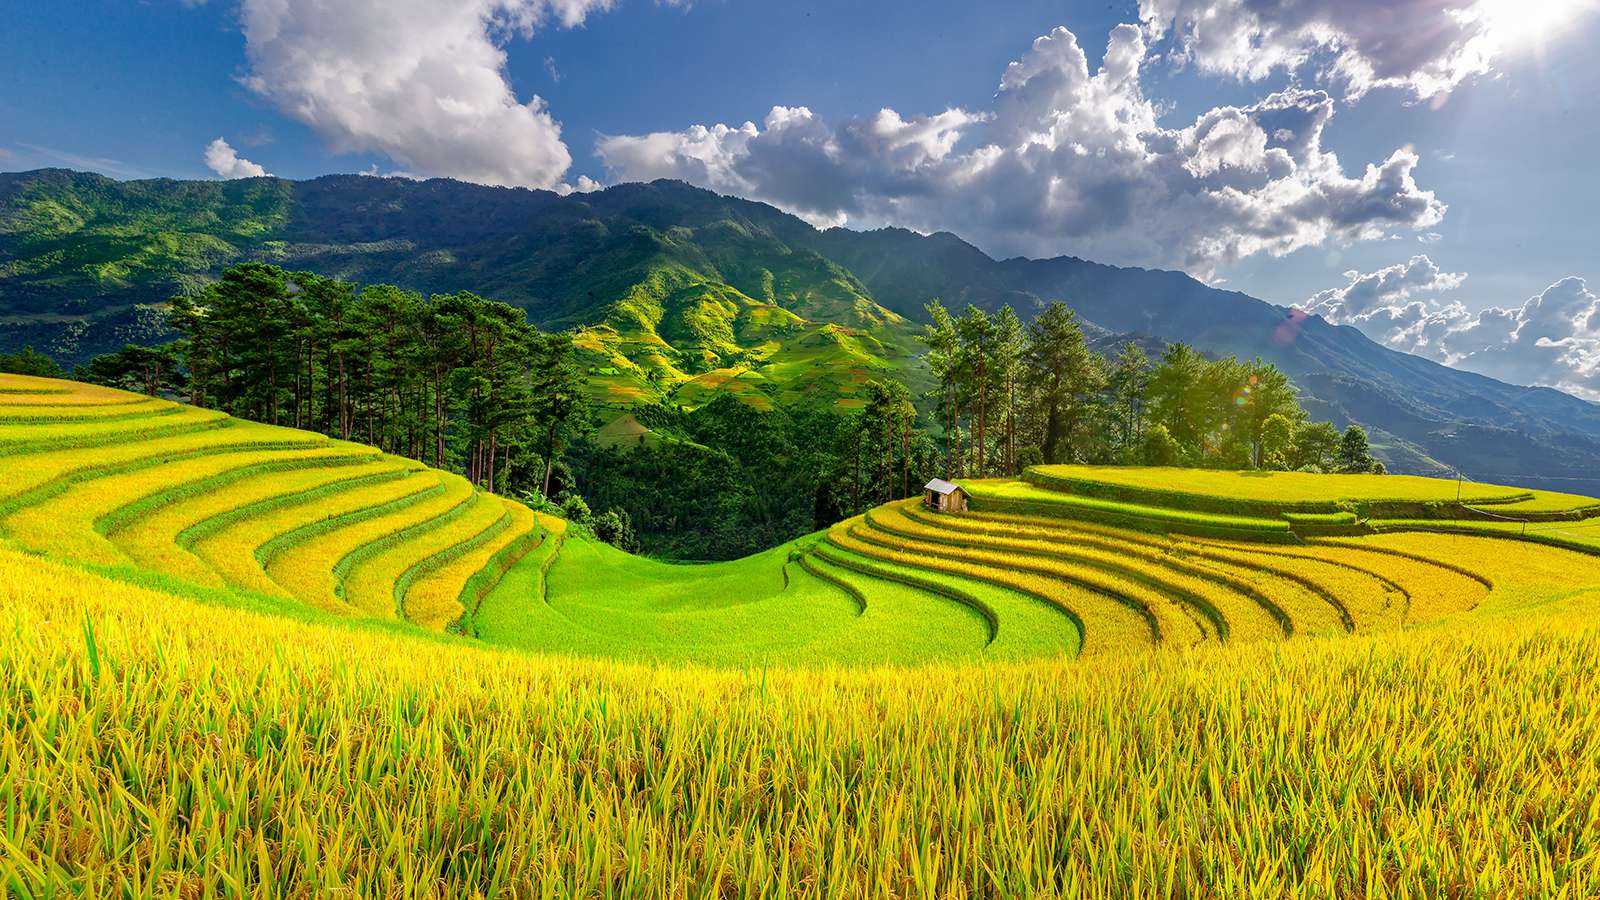 Mu Cang Chai – one of the best attractions in North Vietnam